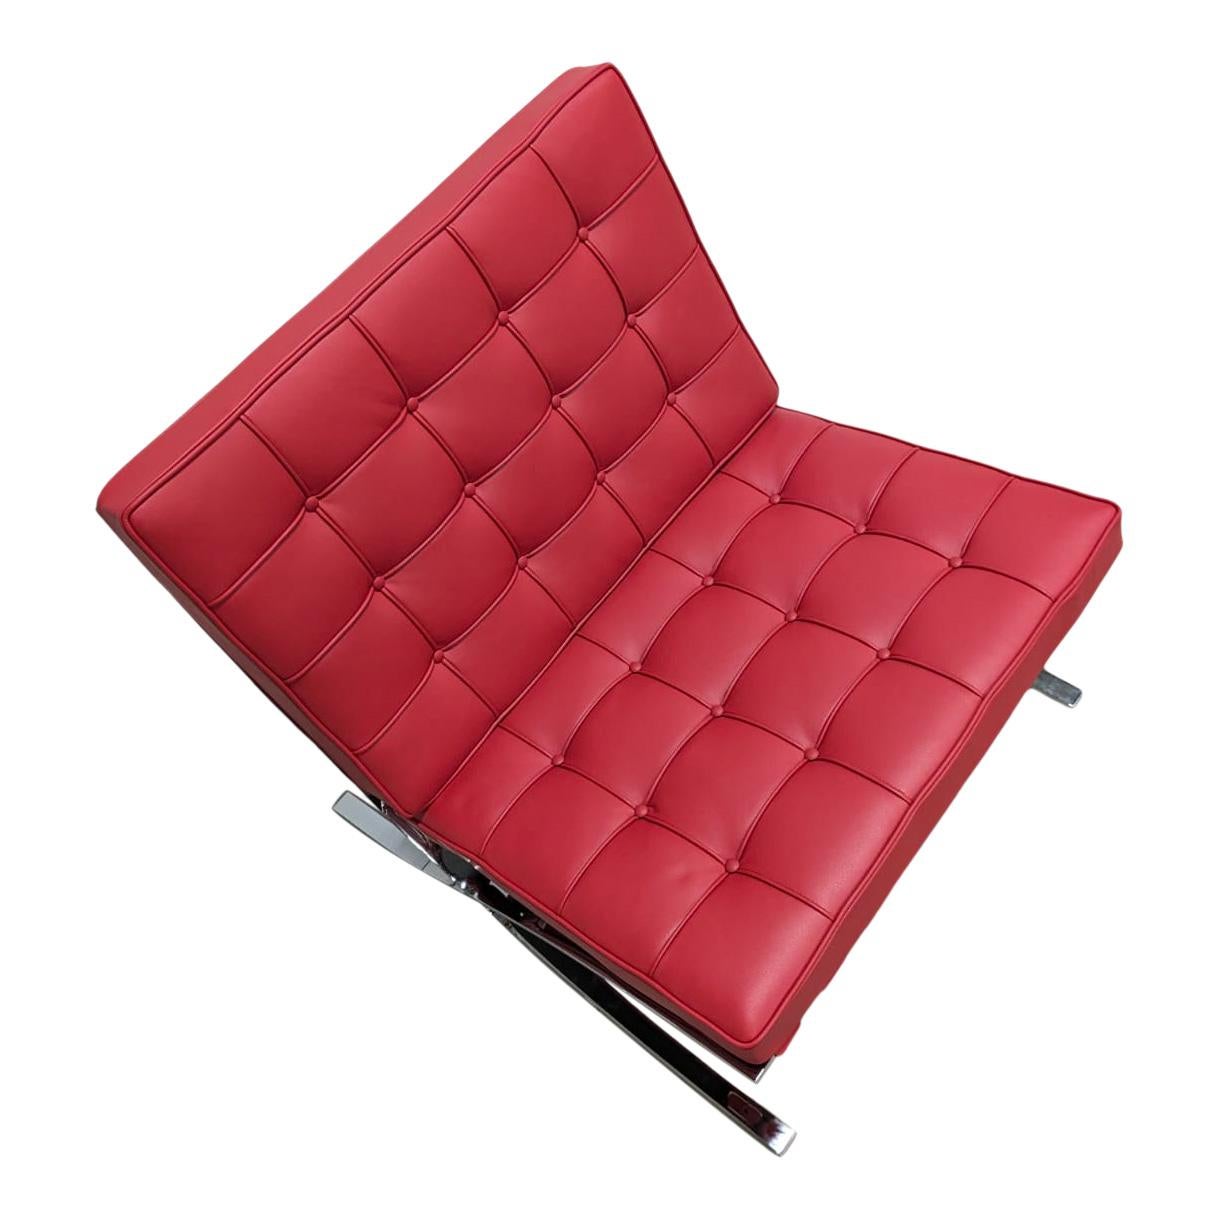 Italian Ludwig Mies Van Der Rohe Bauhaus Red Barcelona Lounge Chair for Knoll, 1972 For Sale